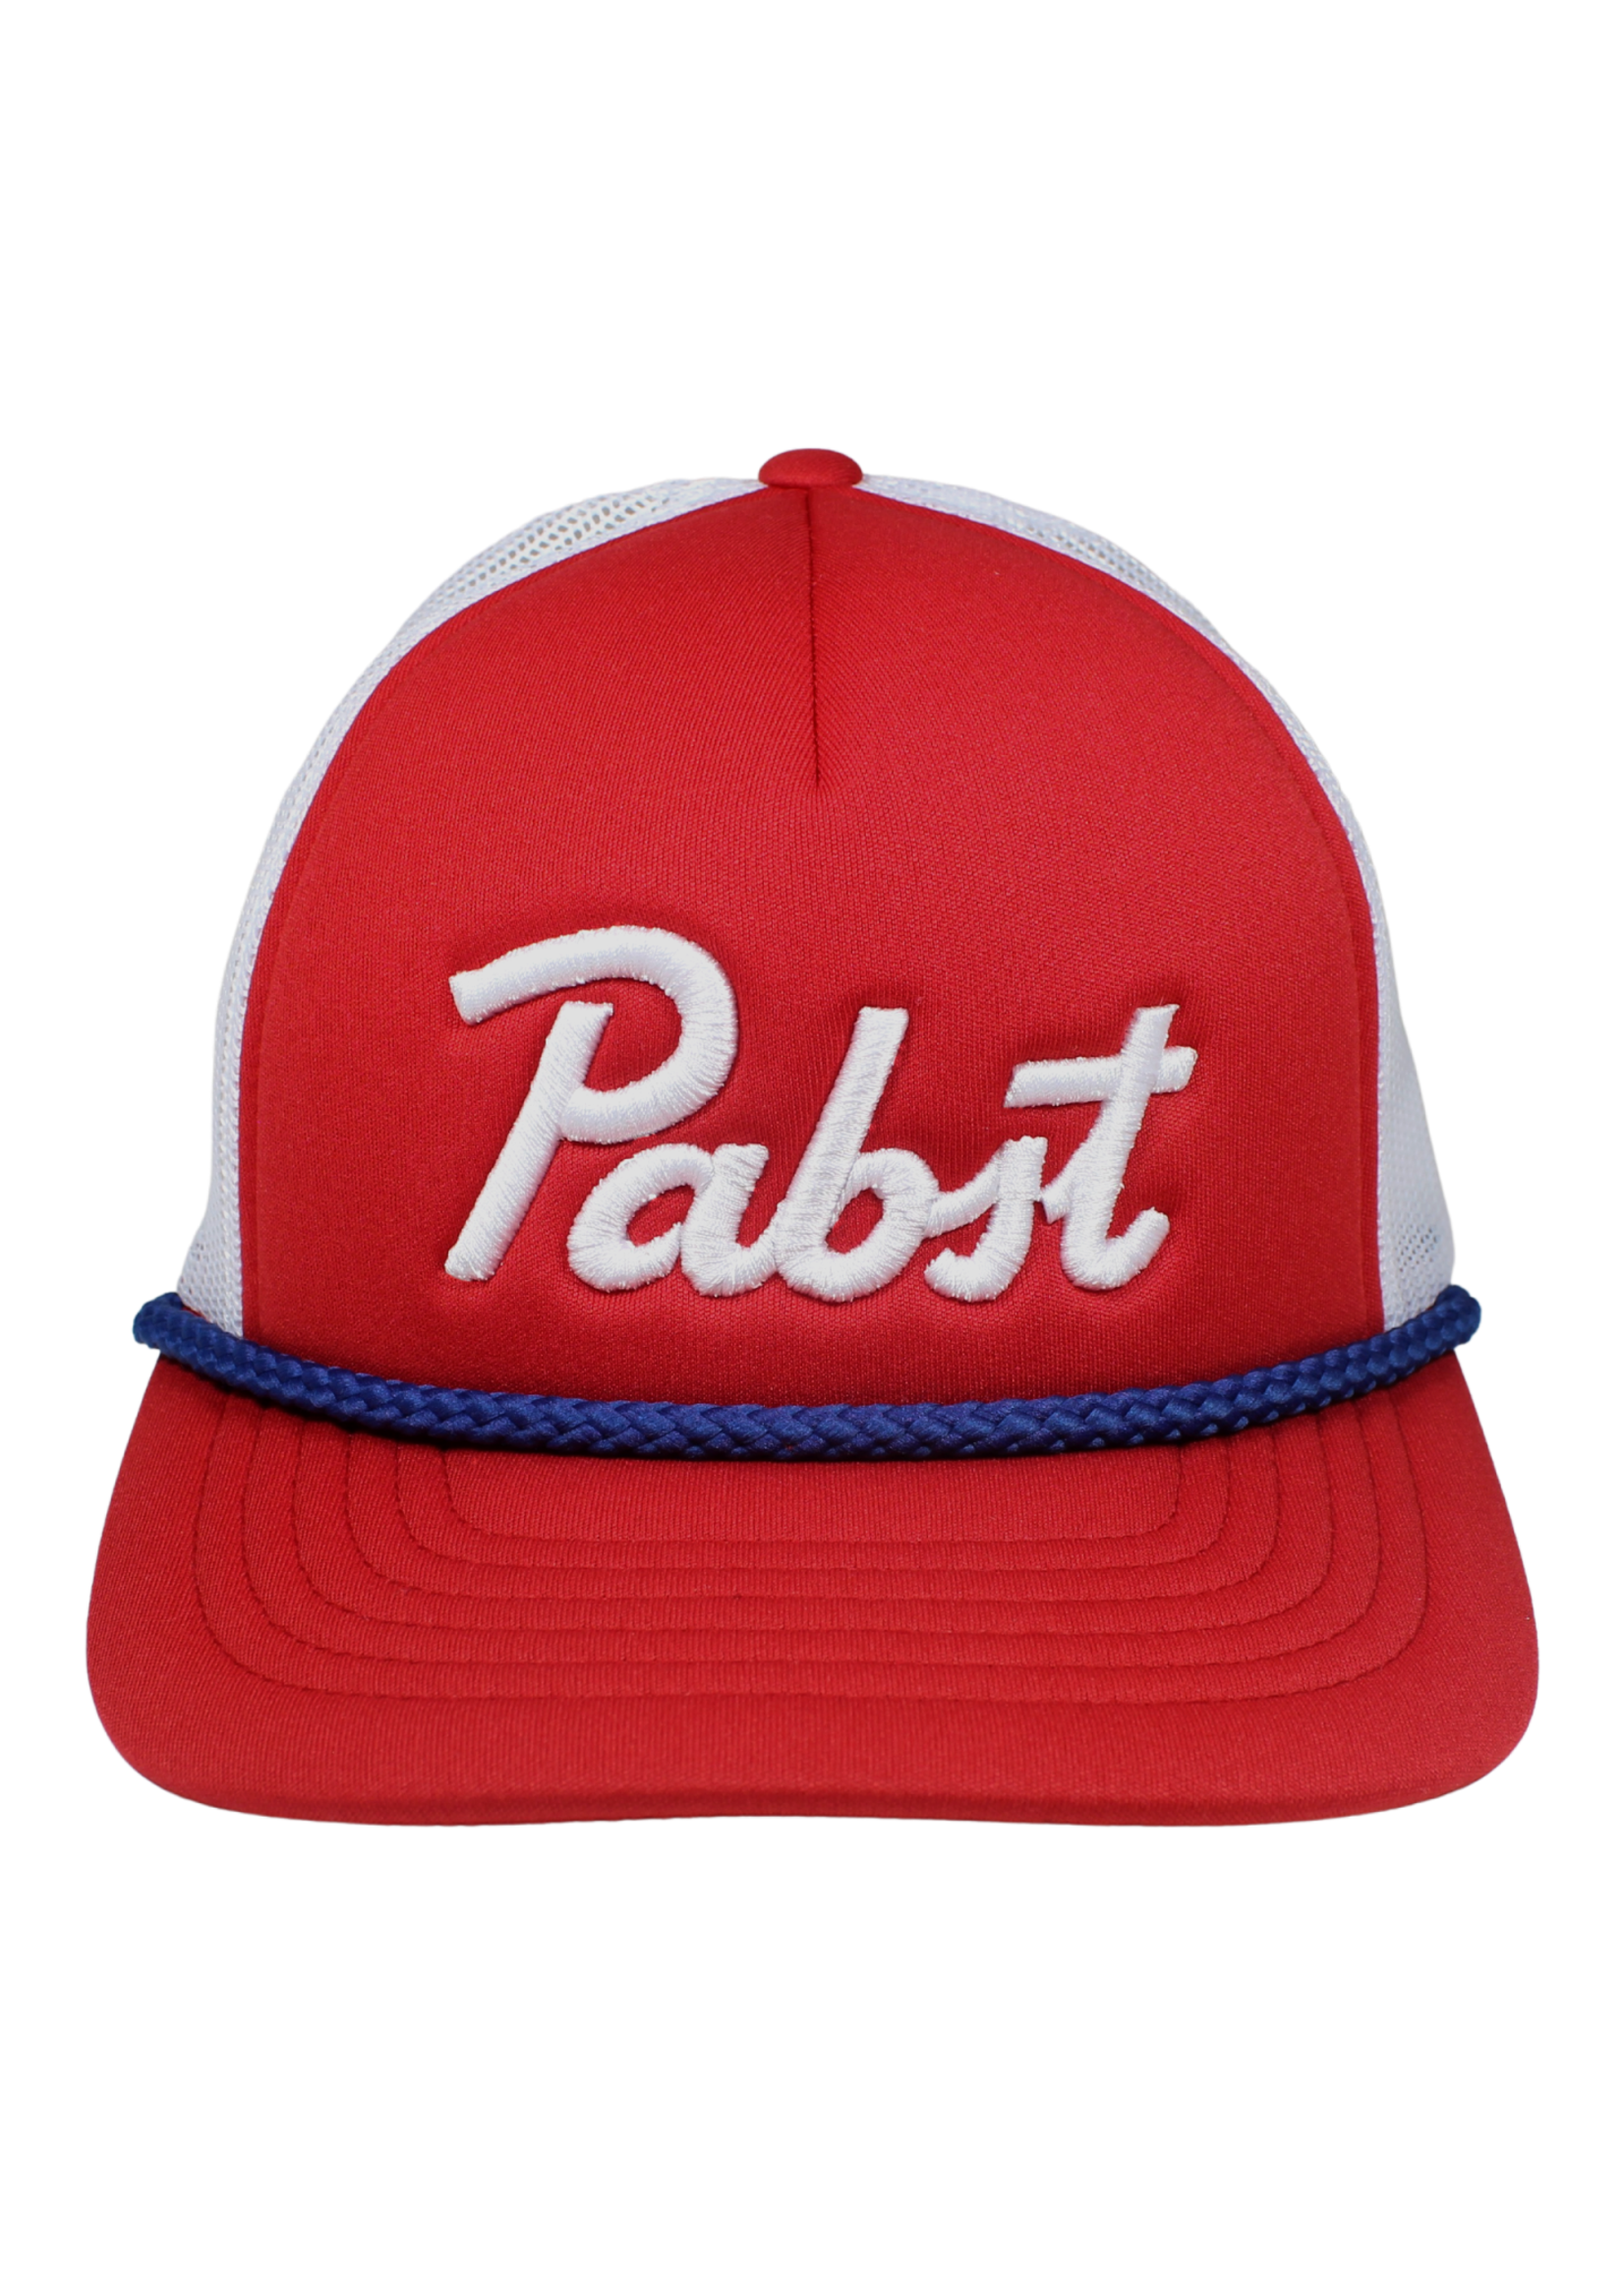 Pabst Pabst Red/White Foam Trucker Hat